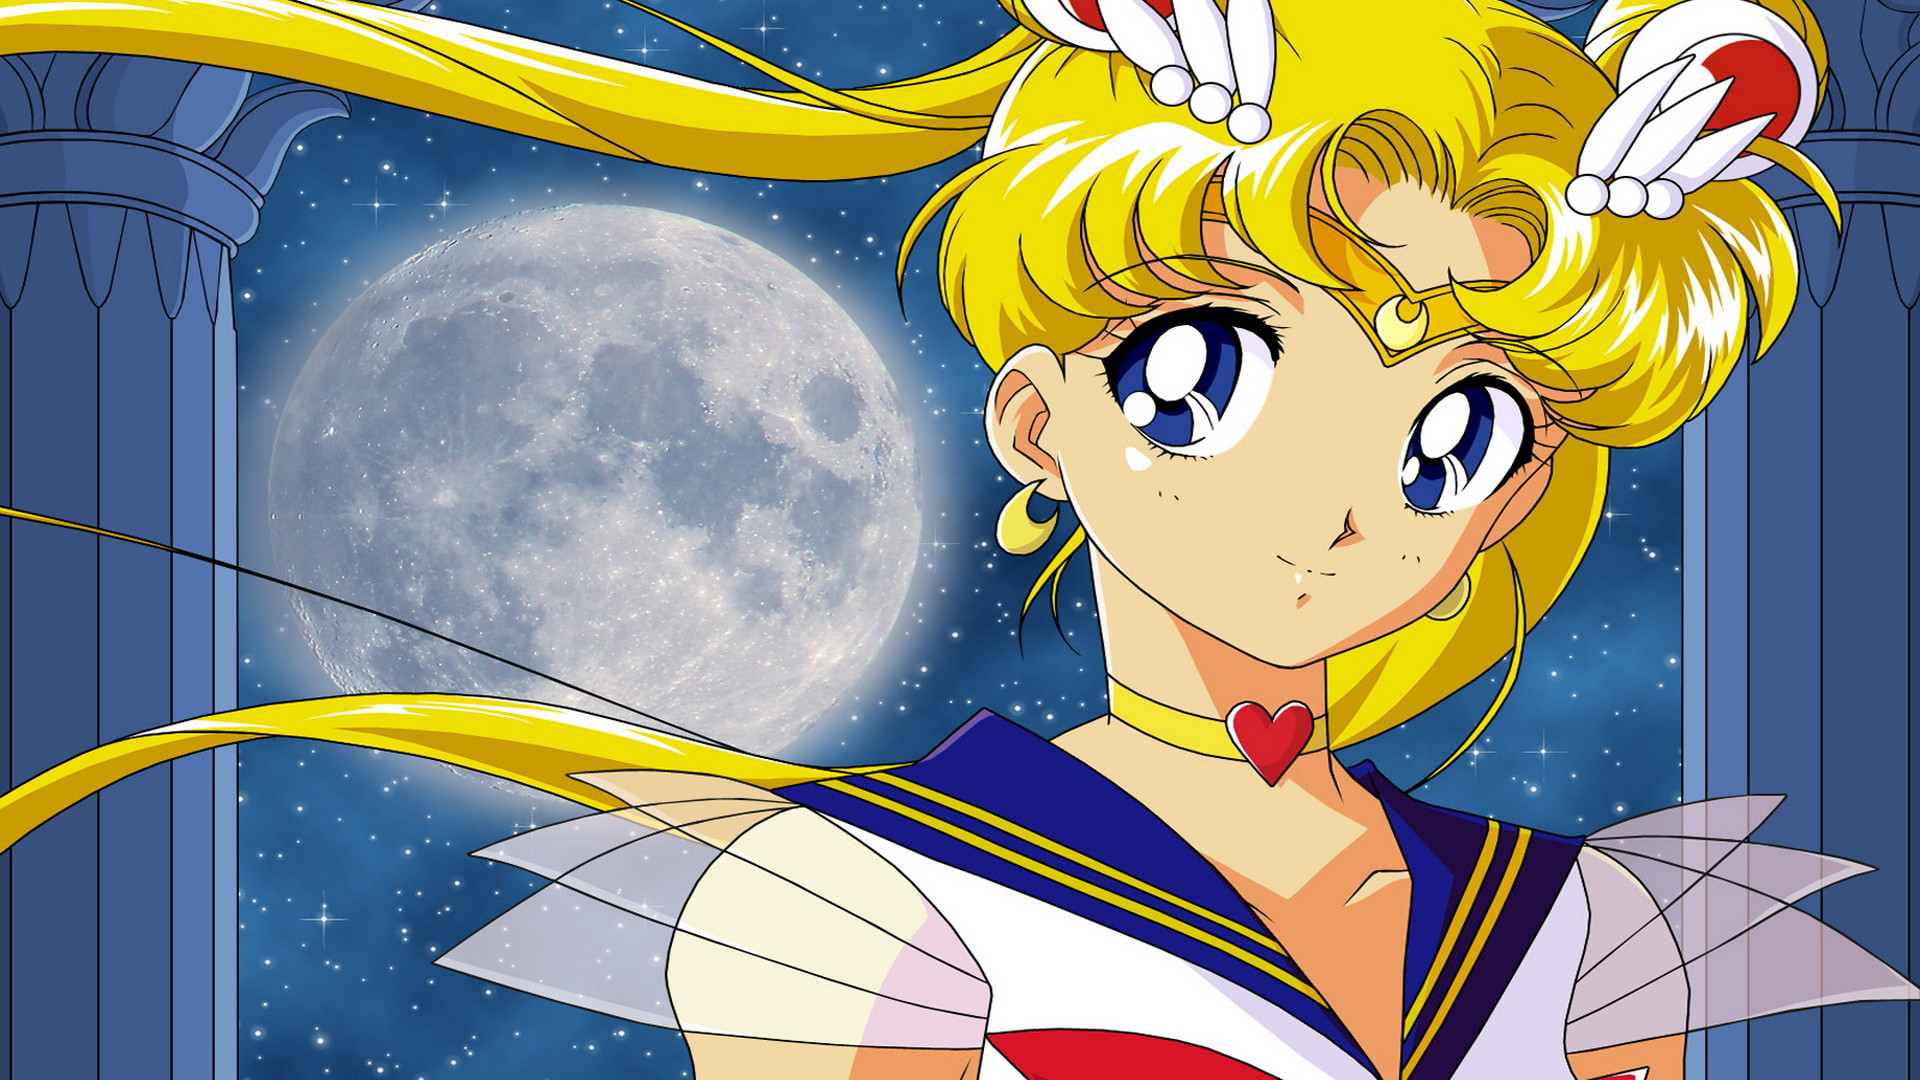 Anime Cute Sailor Moon Wallpaper Background Image